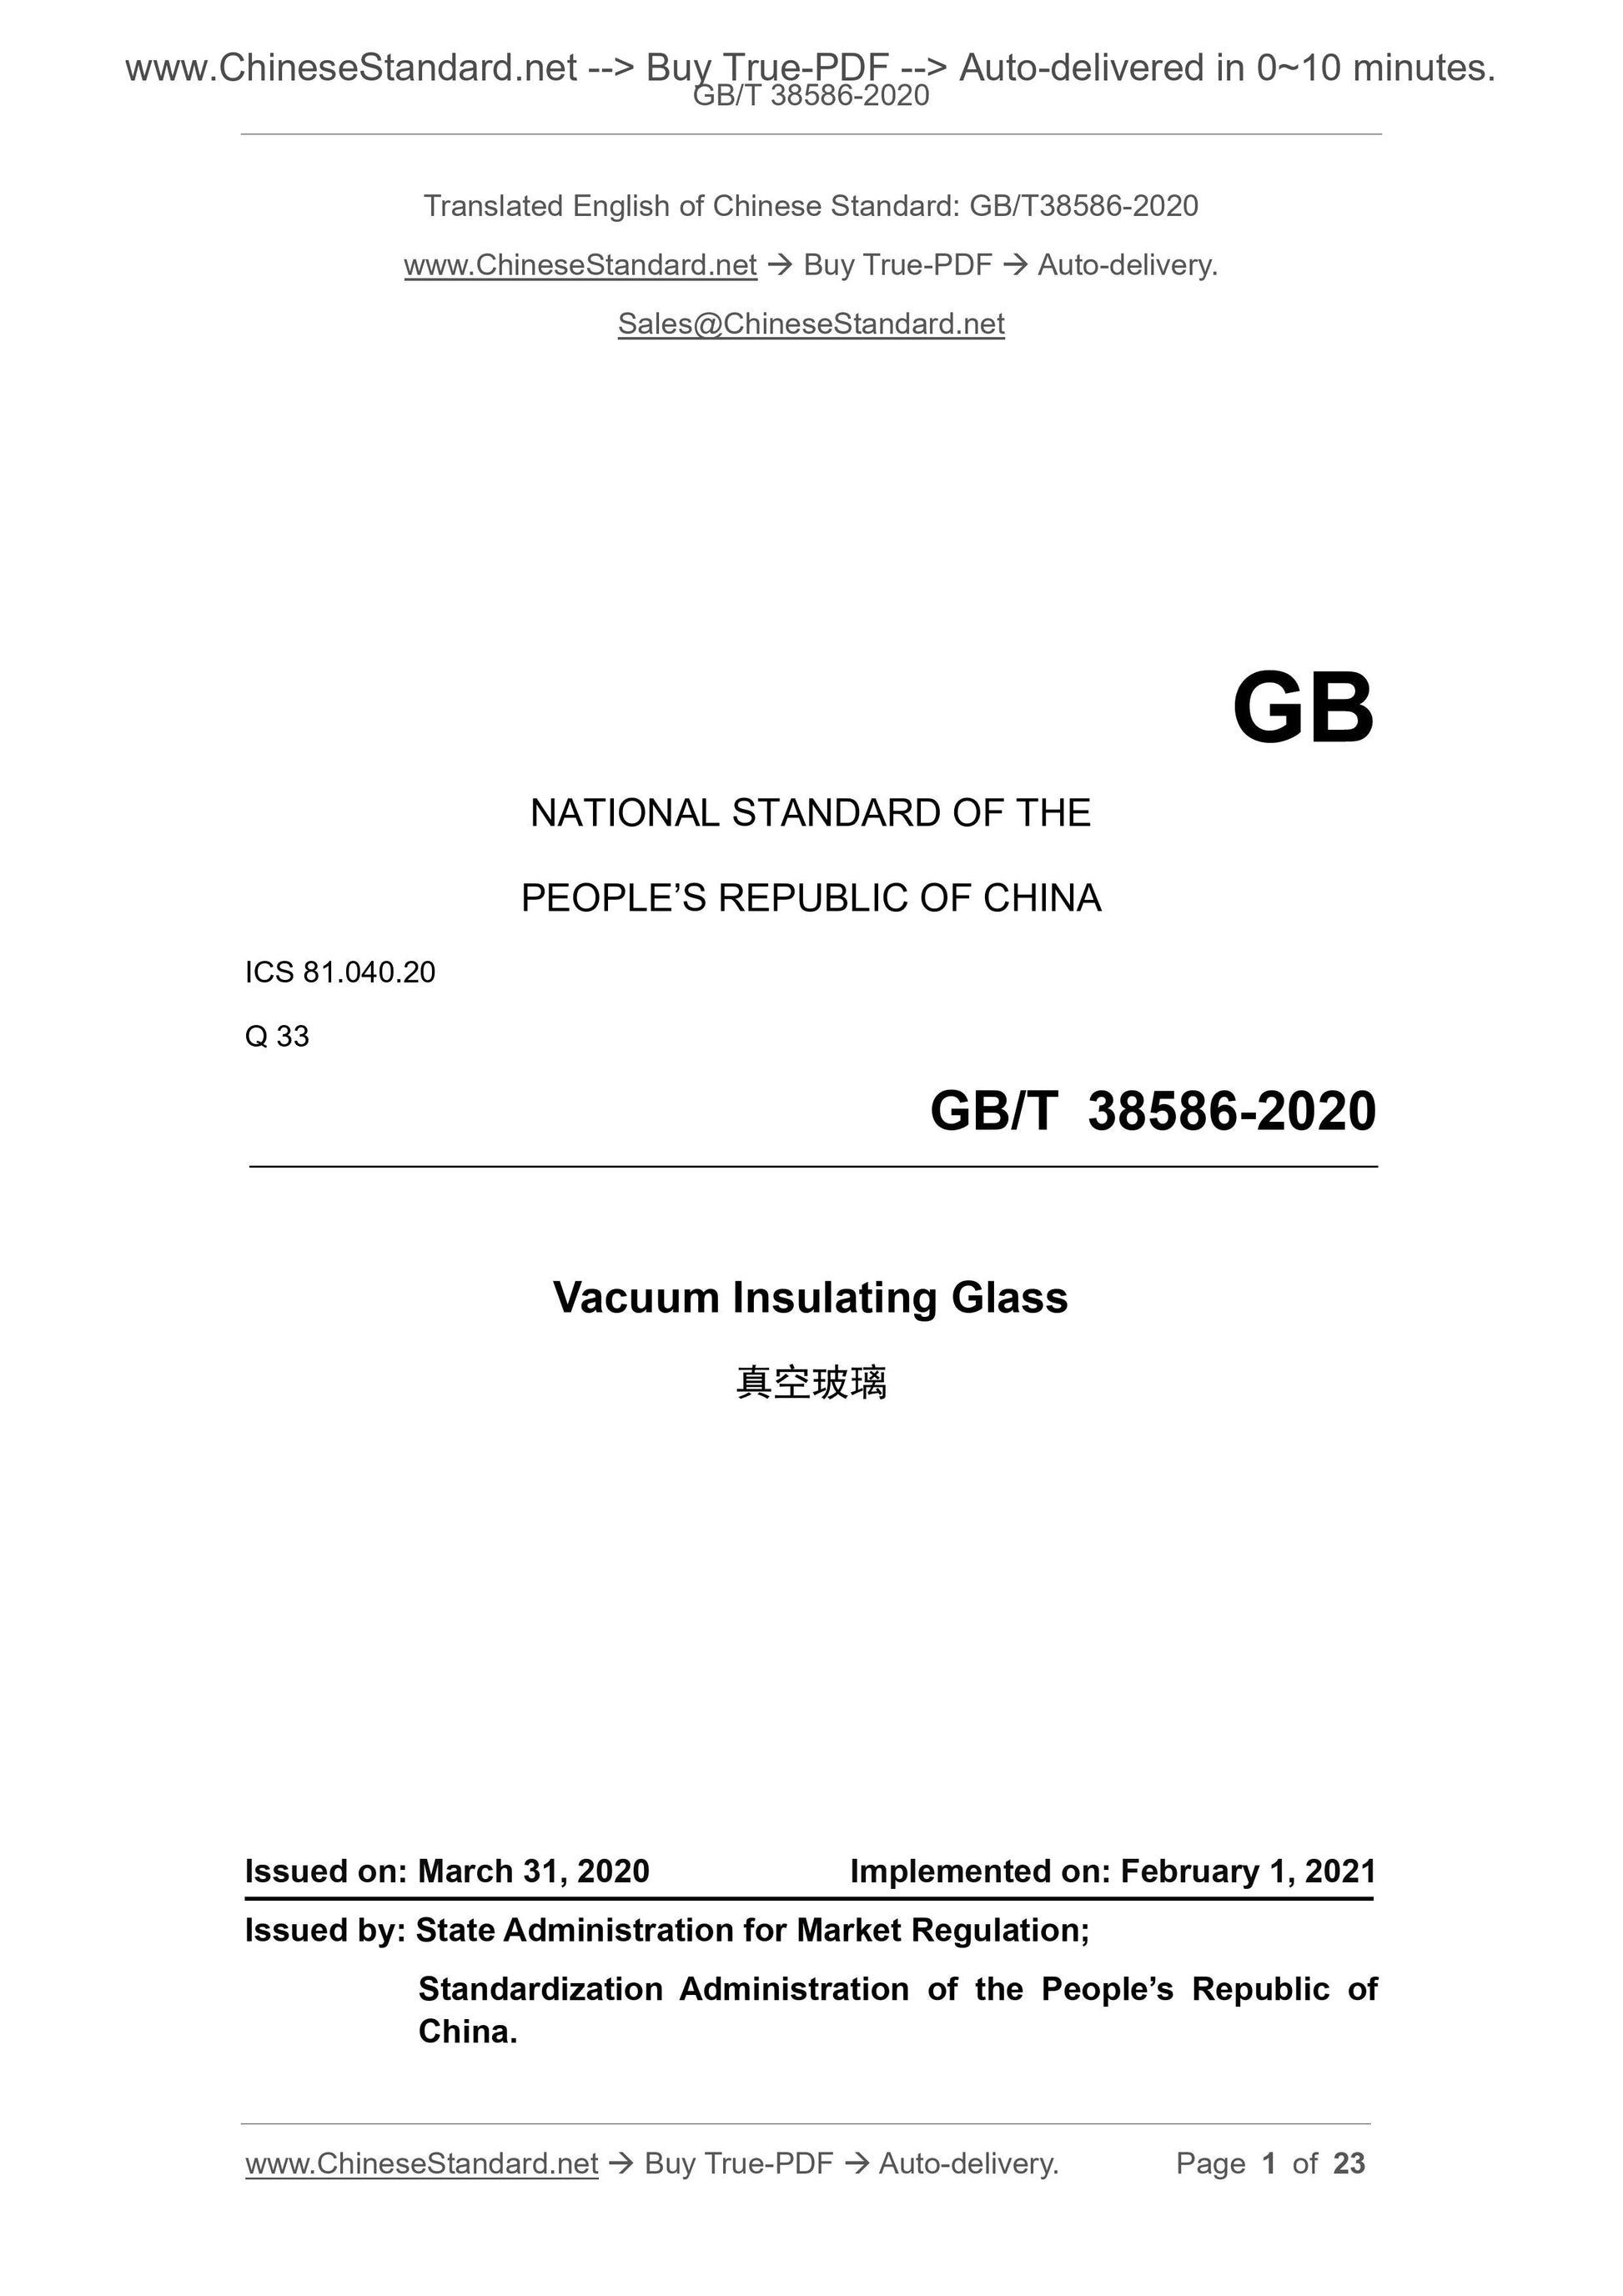 GB/T 38586-2020 Page 1